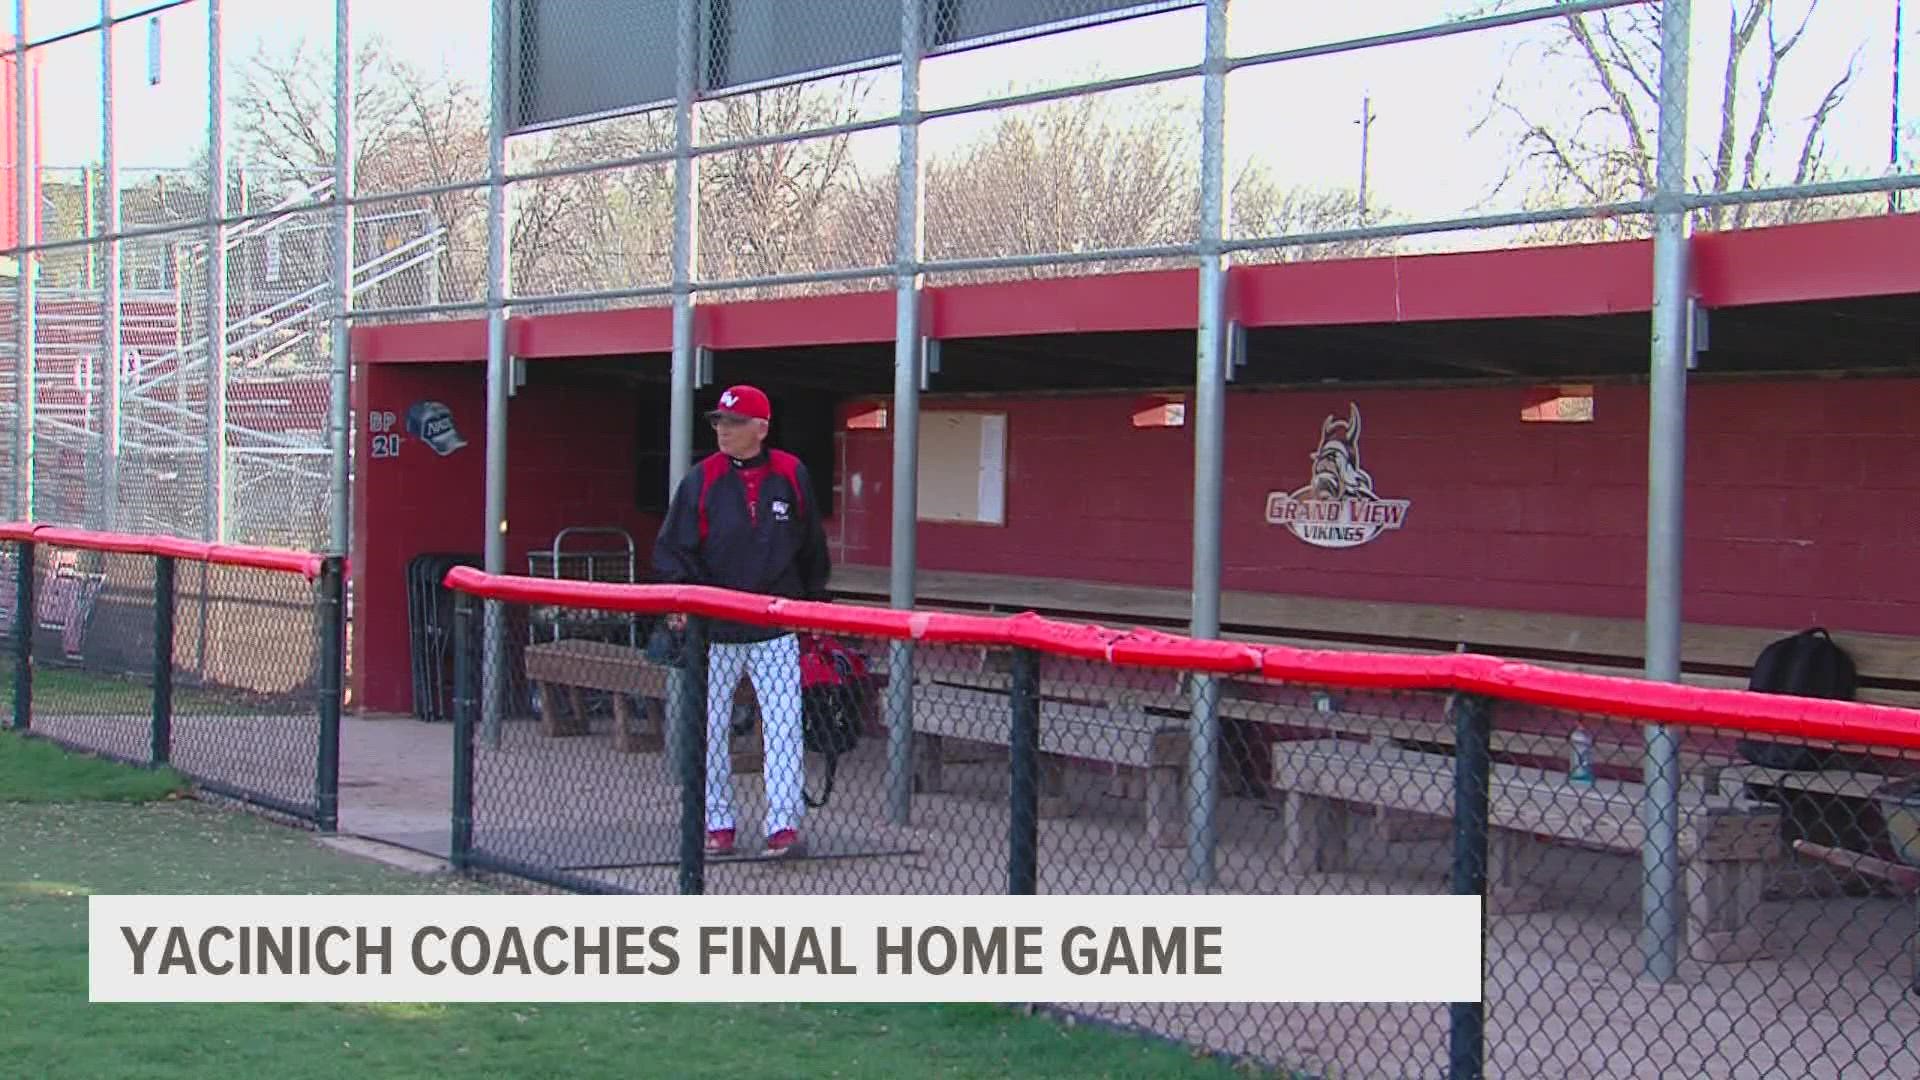 Wednesday marked the end of an era for the Grand View baseball program, as legendary head coach Lou Yacinich coached his final home game.